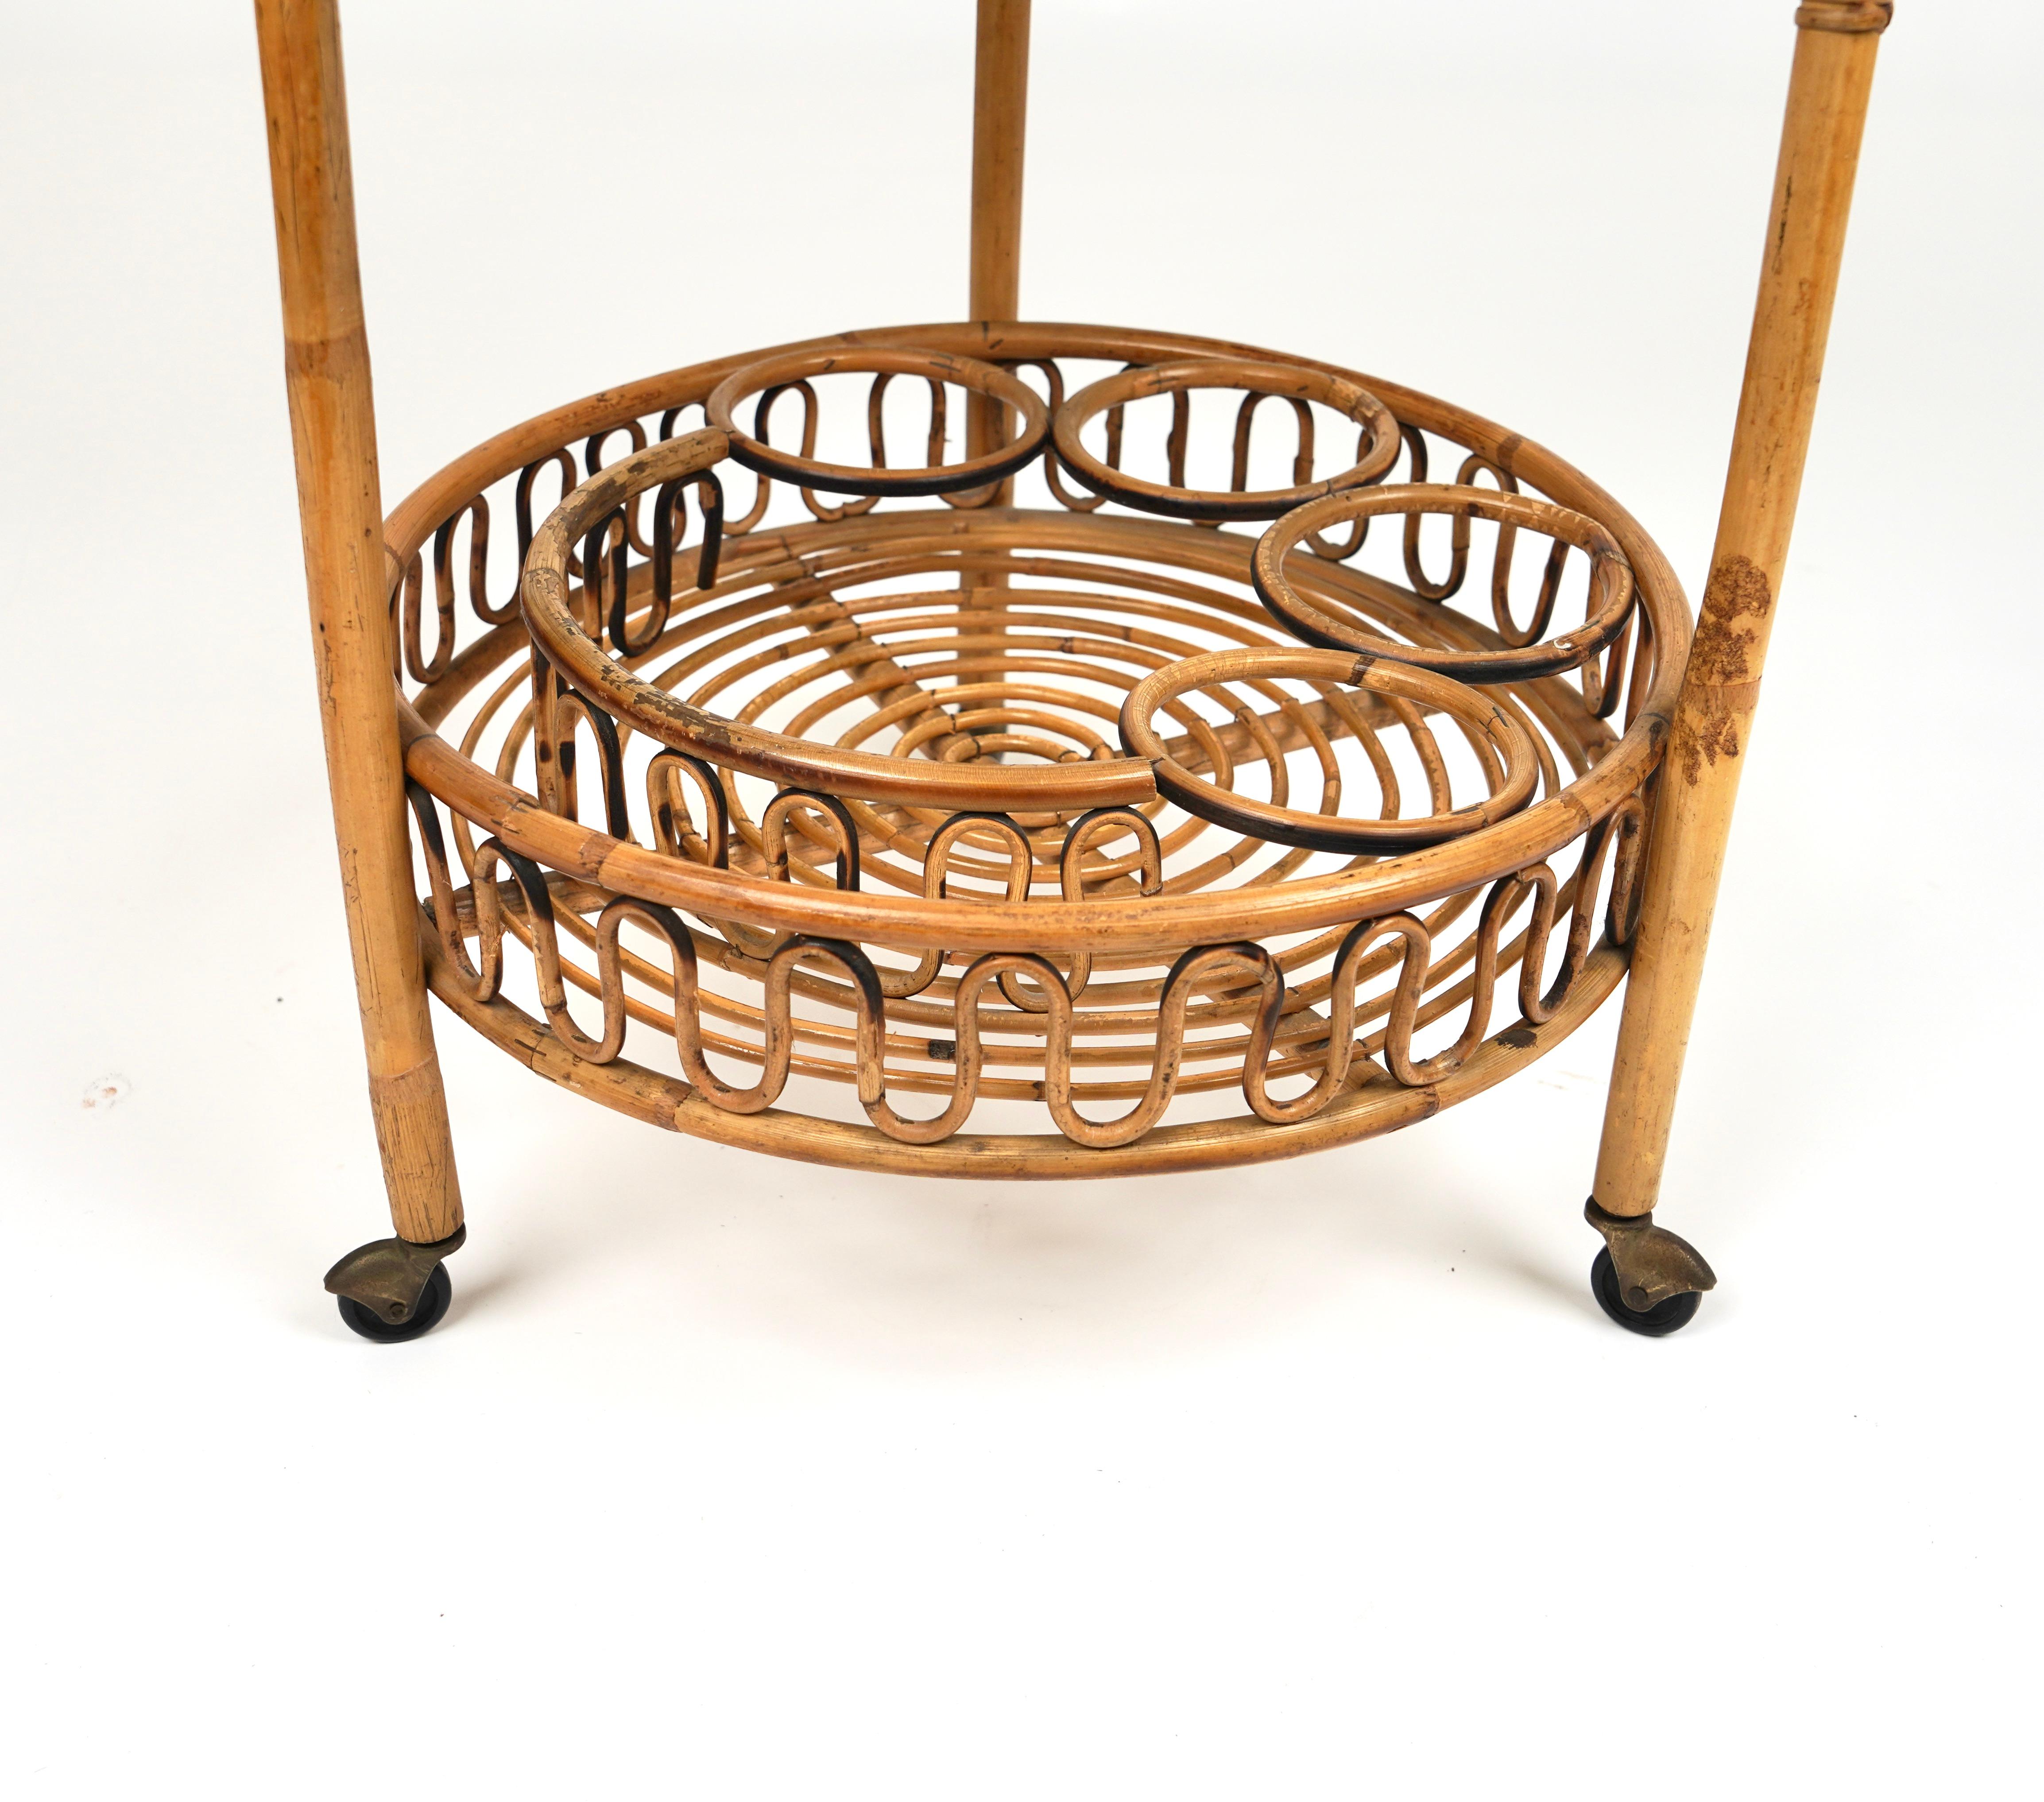 Midcentury Bamboo and Rattan Round Serving Bar Cart Trolley, Italy, circa 1960s For Sale 4